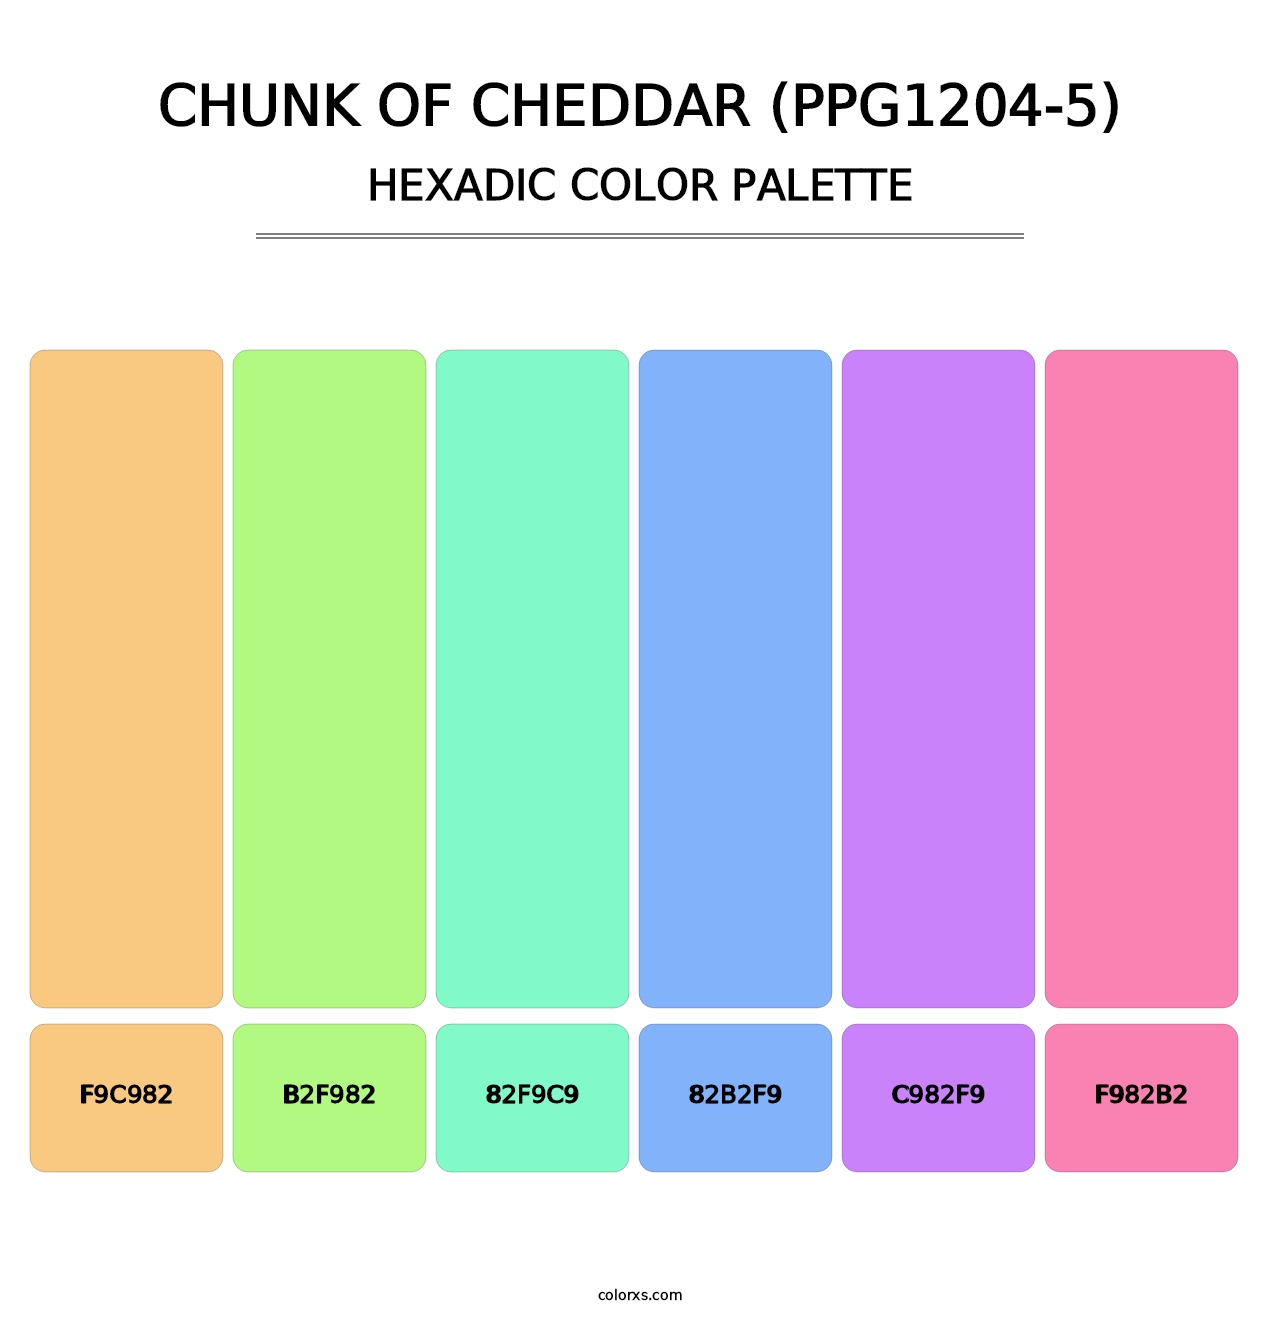 Chunk Of Cheddar (PPG1204-5) - Hexadic Color Palette